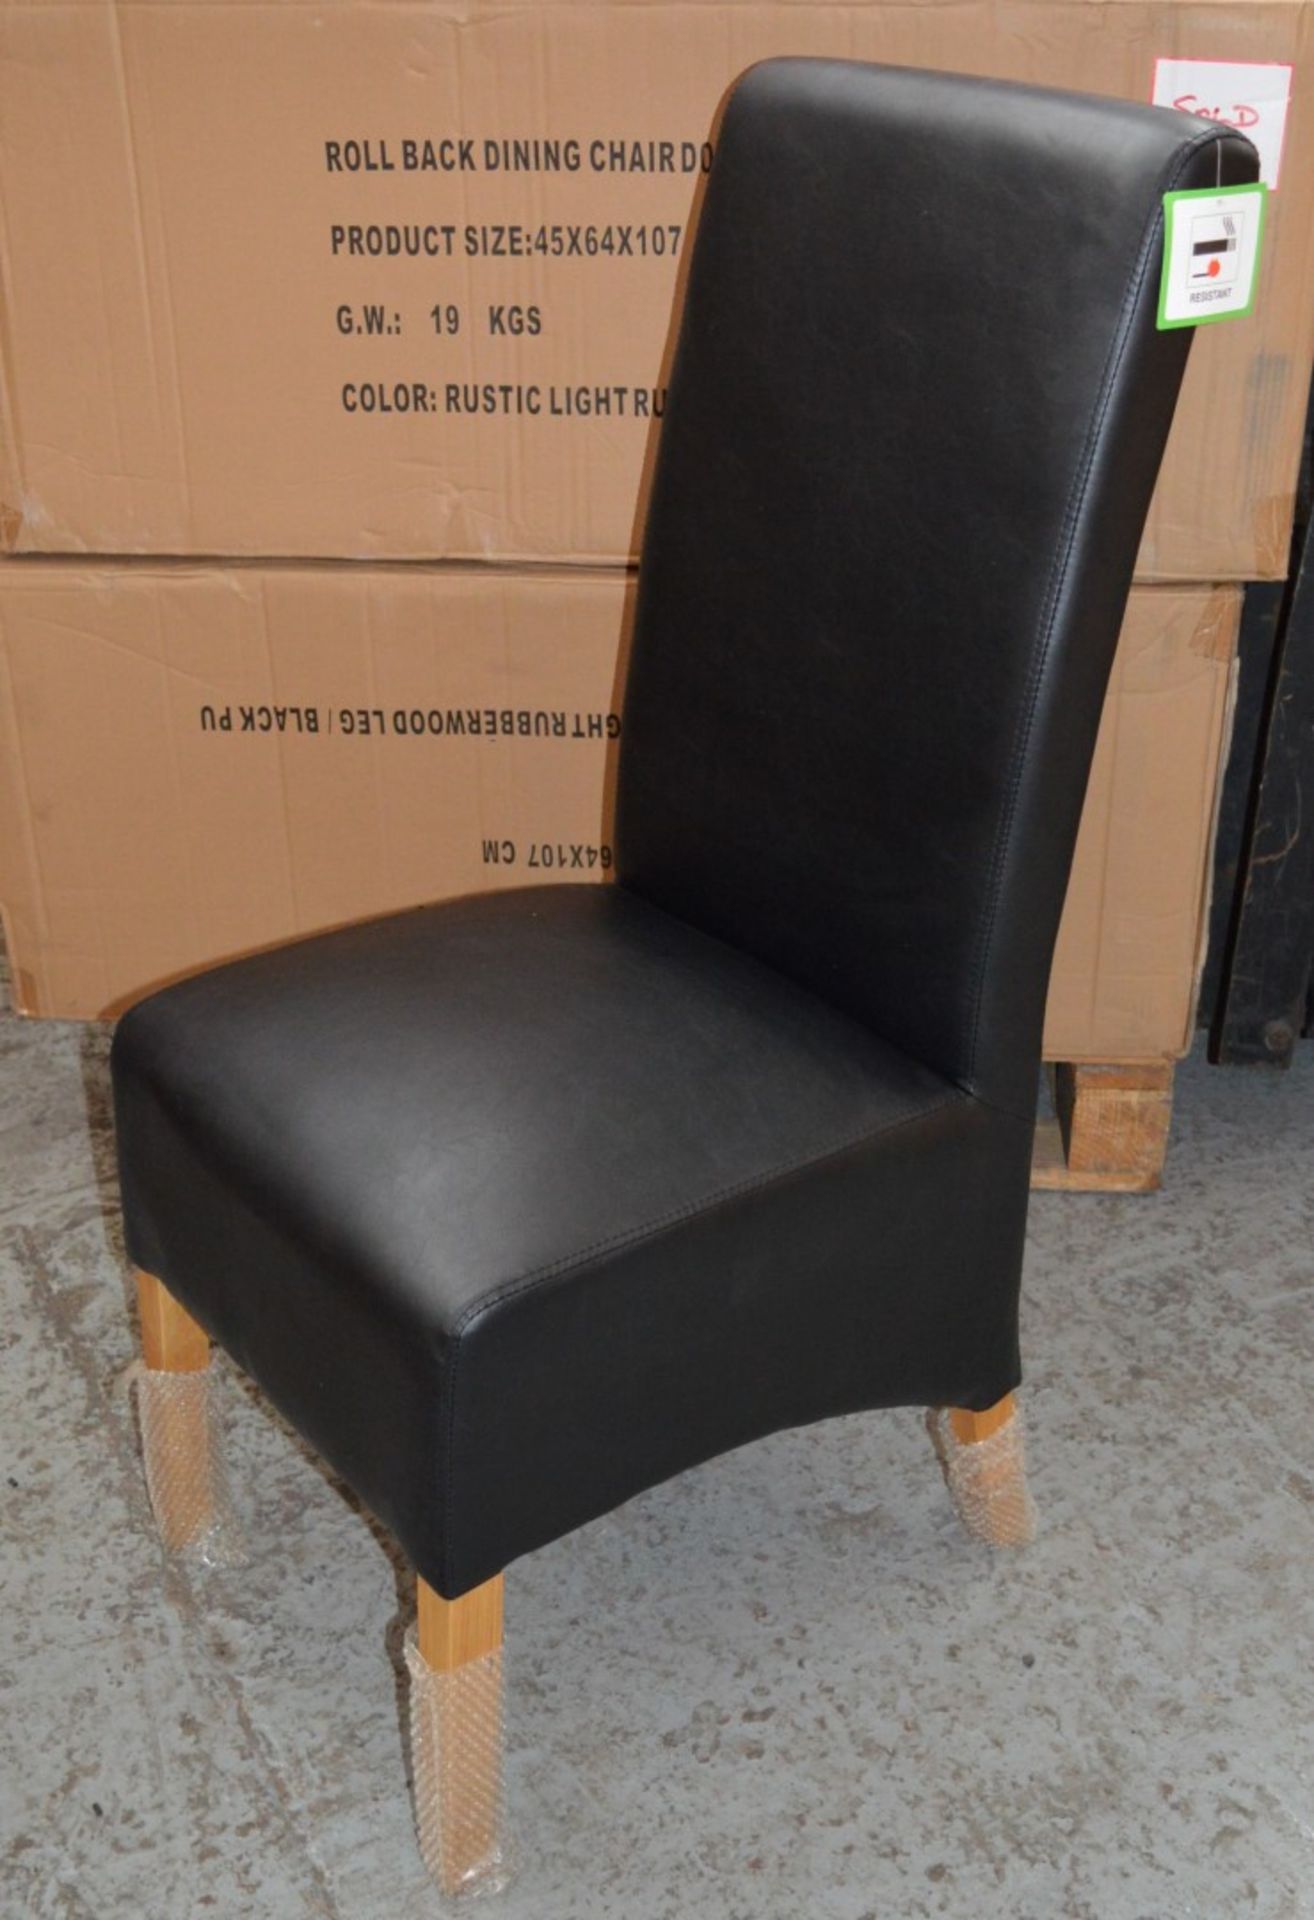 4 x Black Faux Leather Dining Chairs - Seating Dimensions: W44 x D60 x Height 106cm, Seat Height 47c